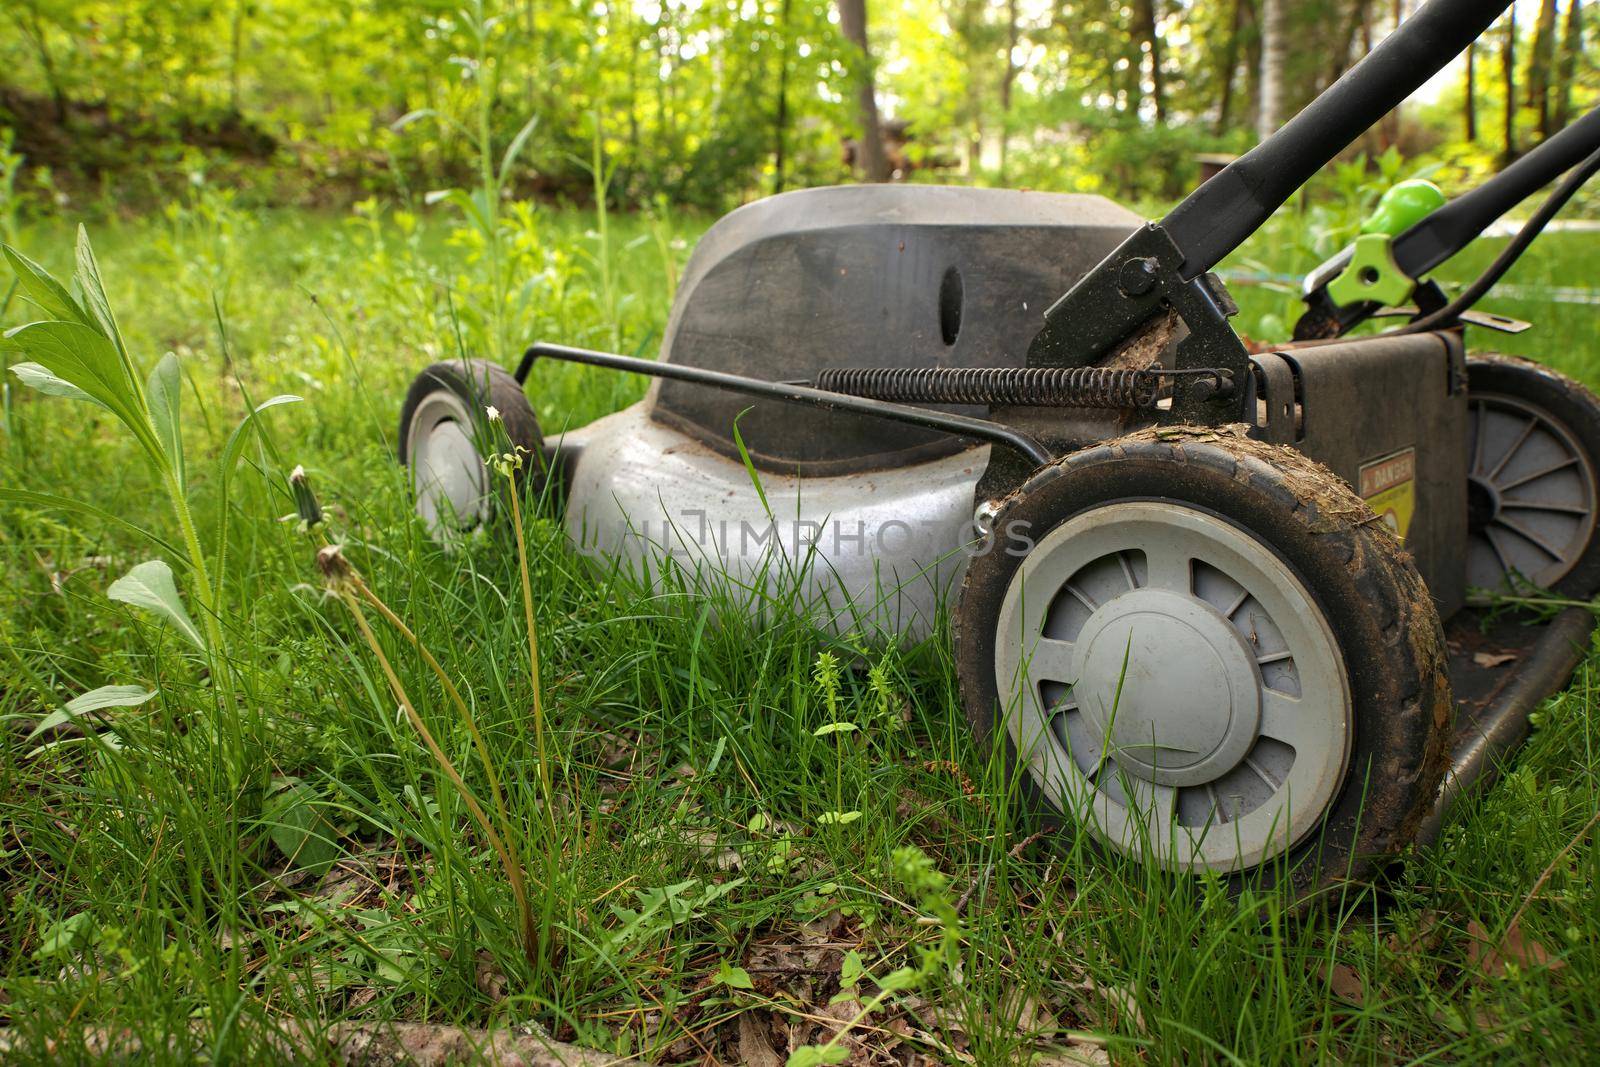 Low Angle Close-up of a lawnmower ready to be cutting long grass or illustrating concept of avoiding cutting to help bees and pollinators. High quality photo